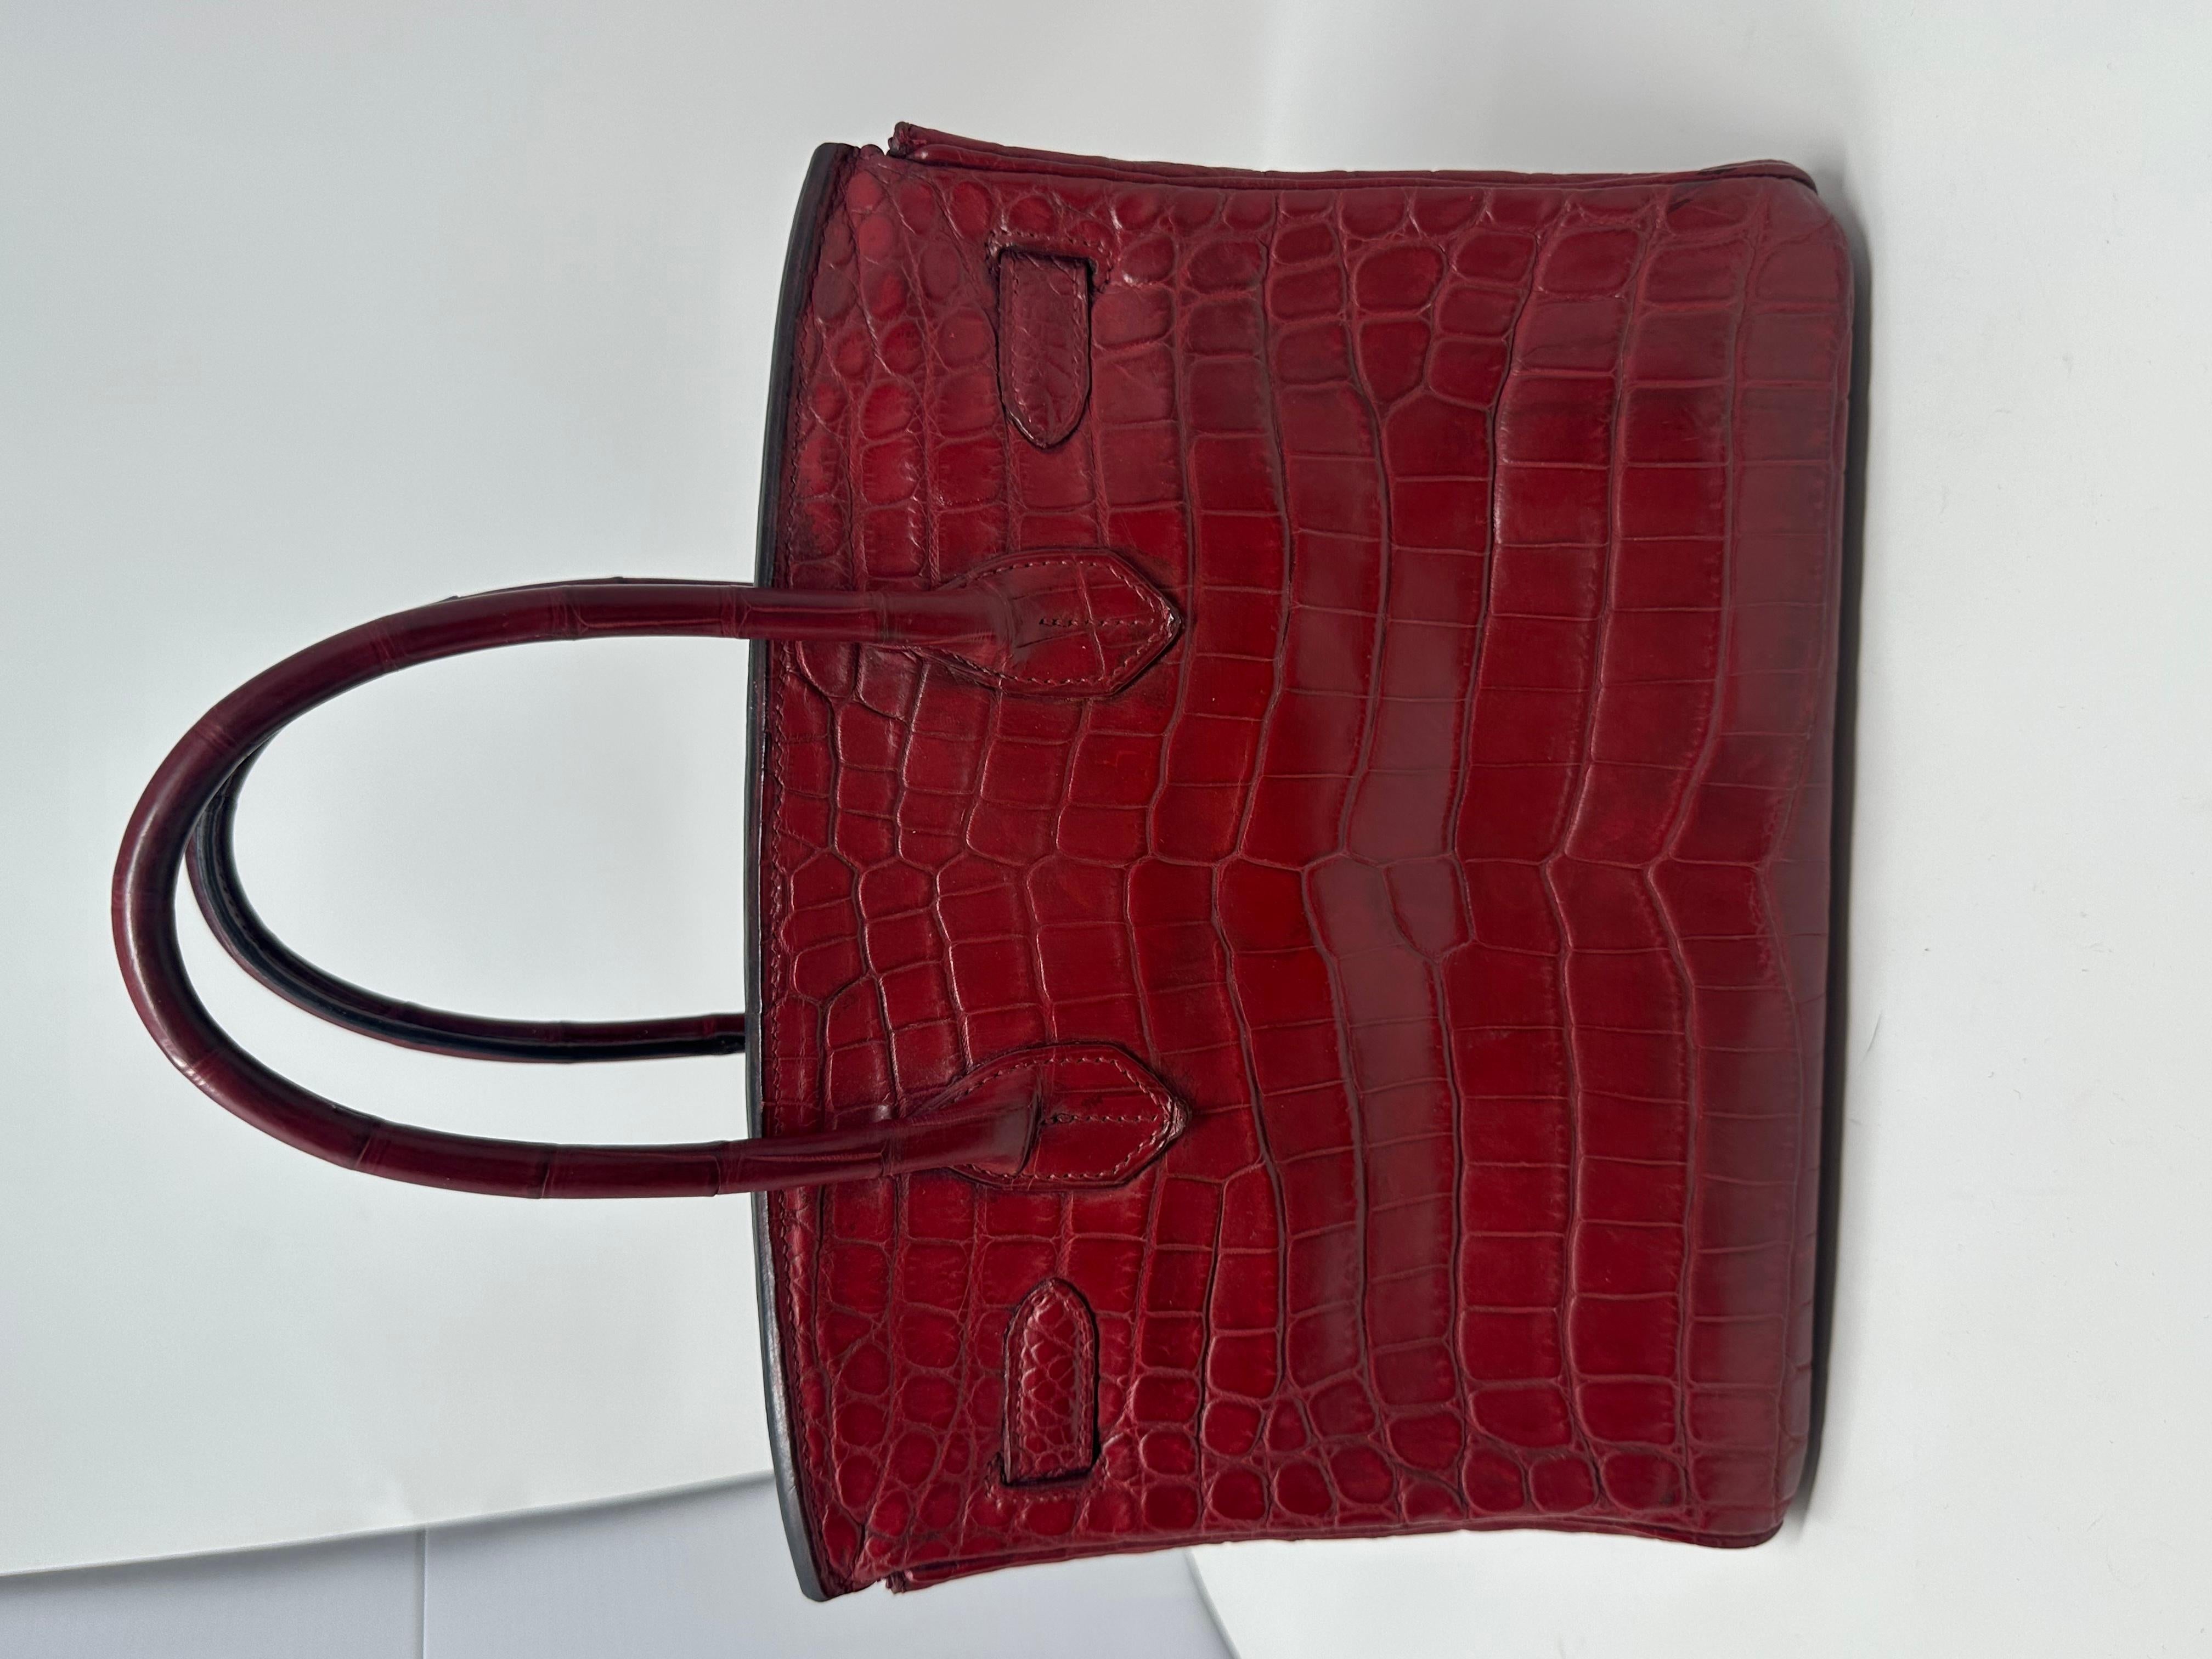 Hermes Birkin 30 nilo crocodile brown bordeaux colour with brushed hardware. The leather ages so beautifully!
It is in good condition with signs of wear in the corners and overall the leather. Some stitching flaws as seen on the pictures.
Comes with